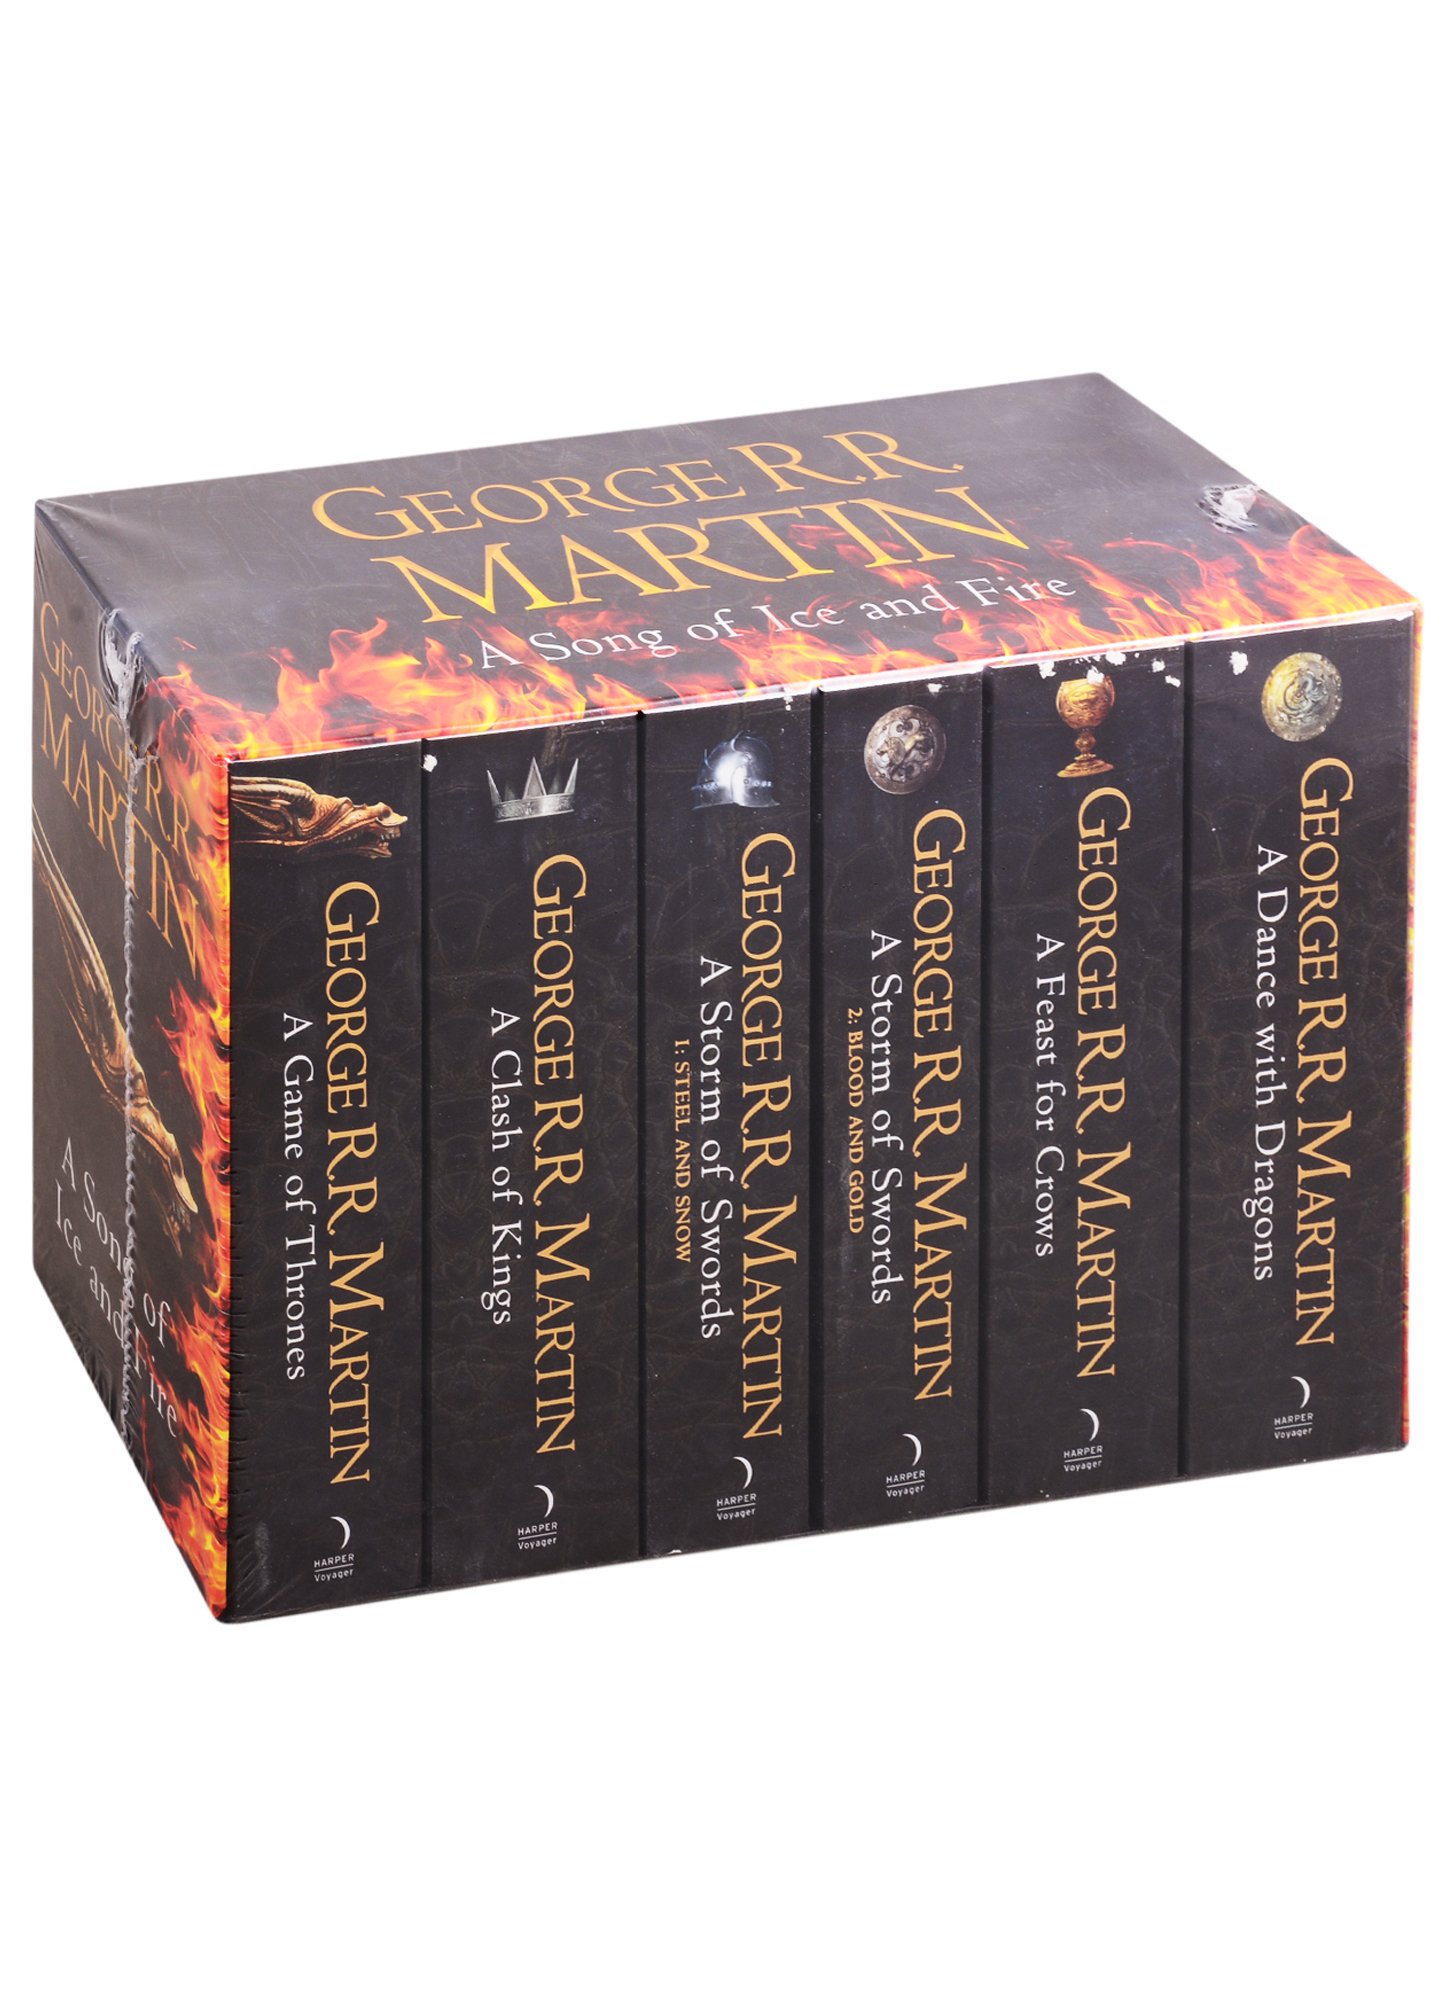 Song of Ice and Fire-Game of Thrones: The complete box set of all 6 books Martin George R. R.